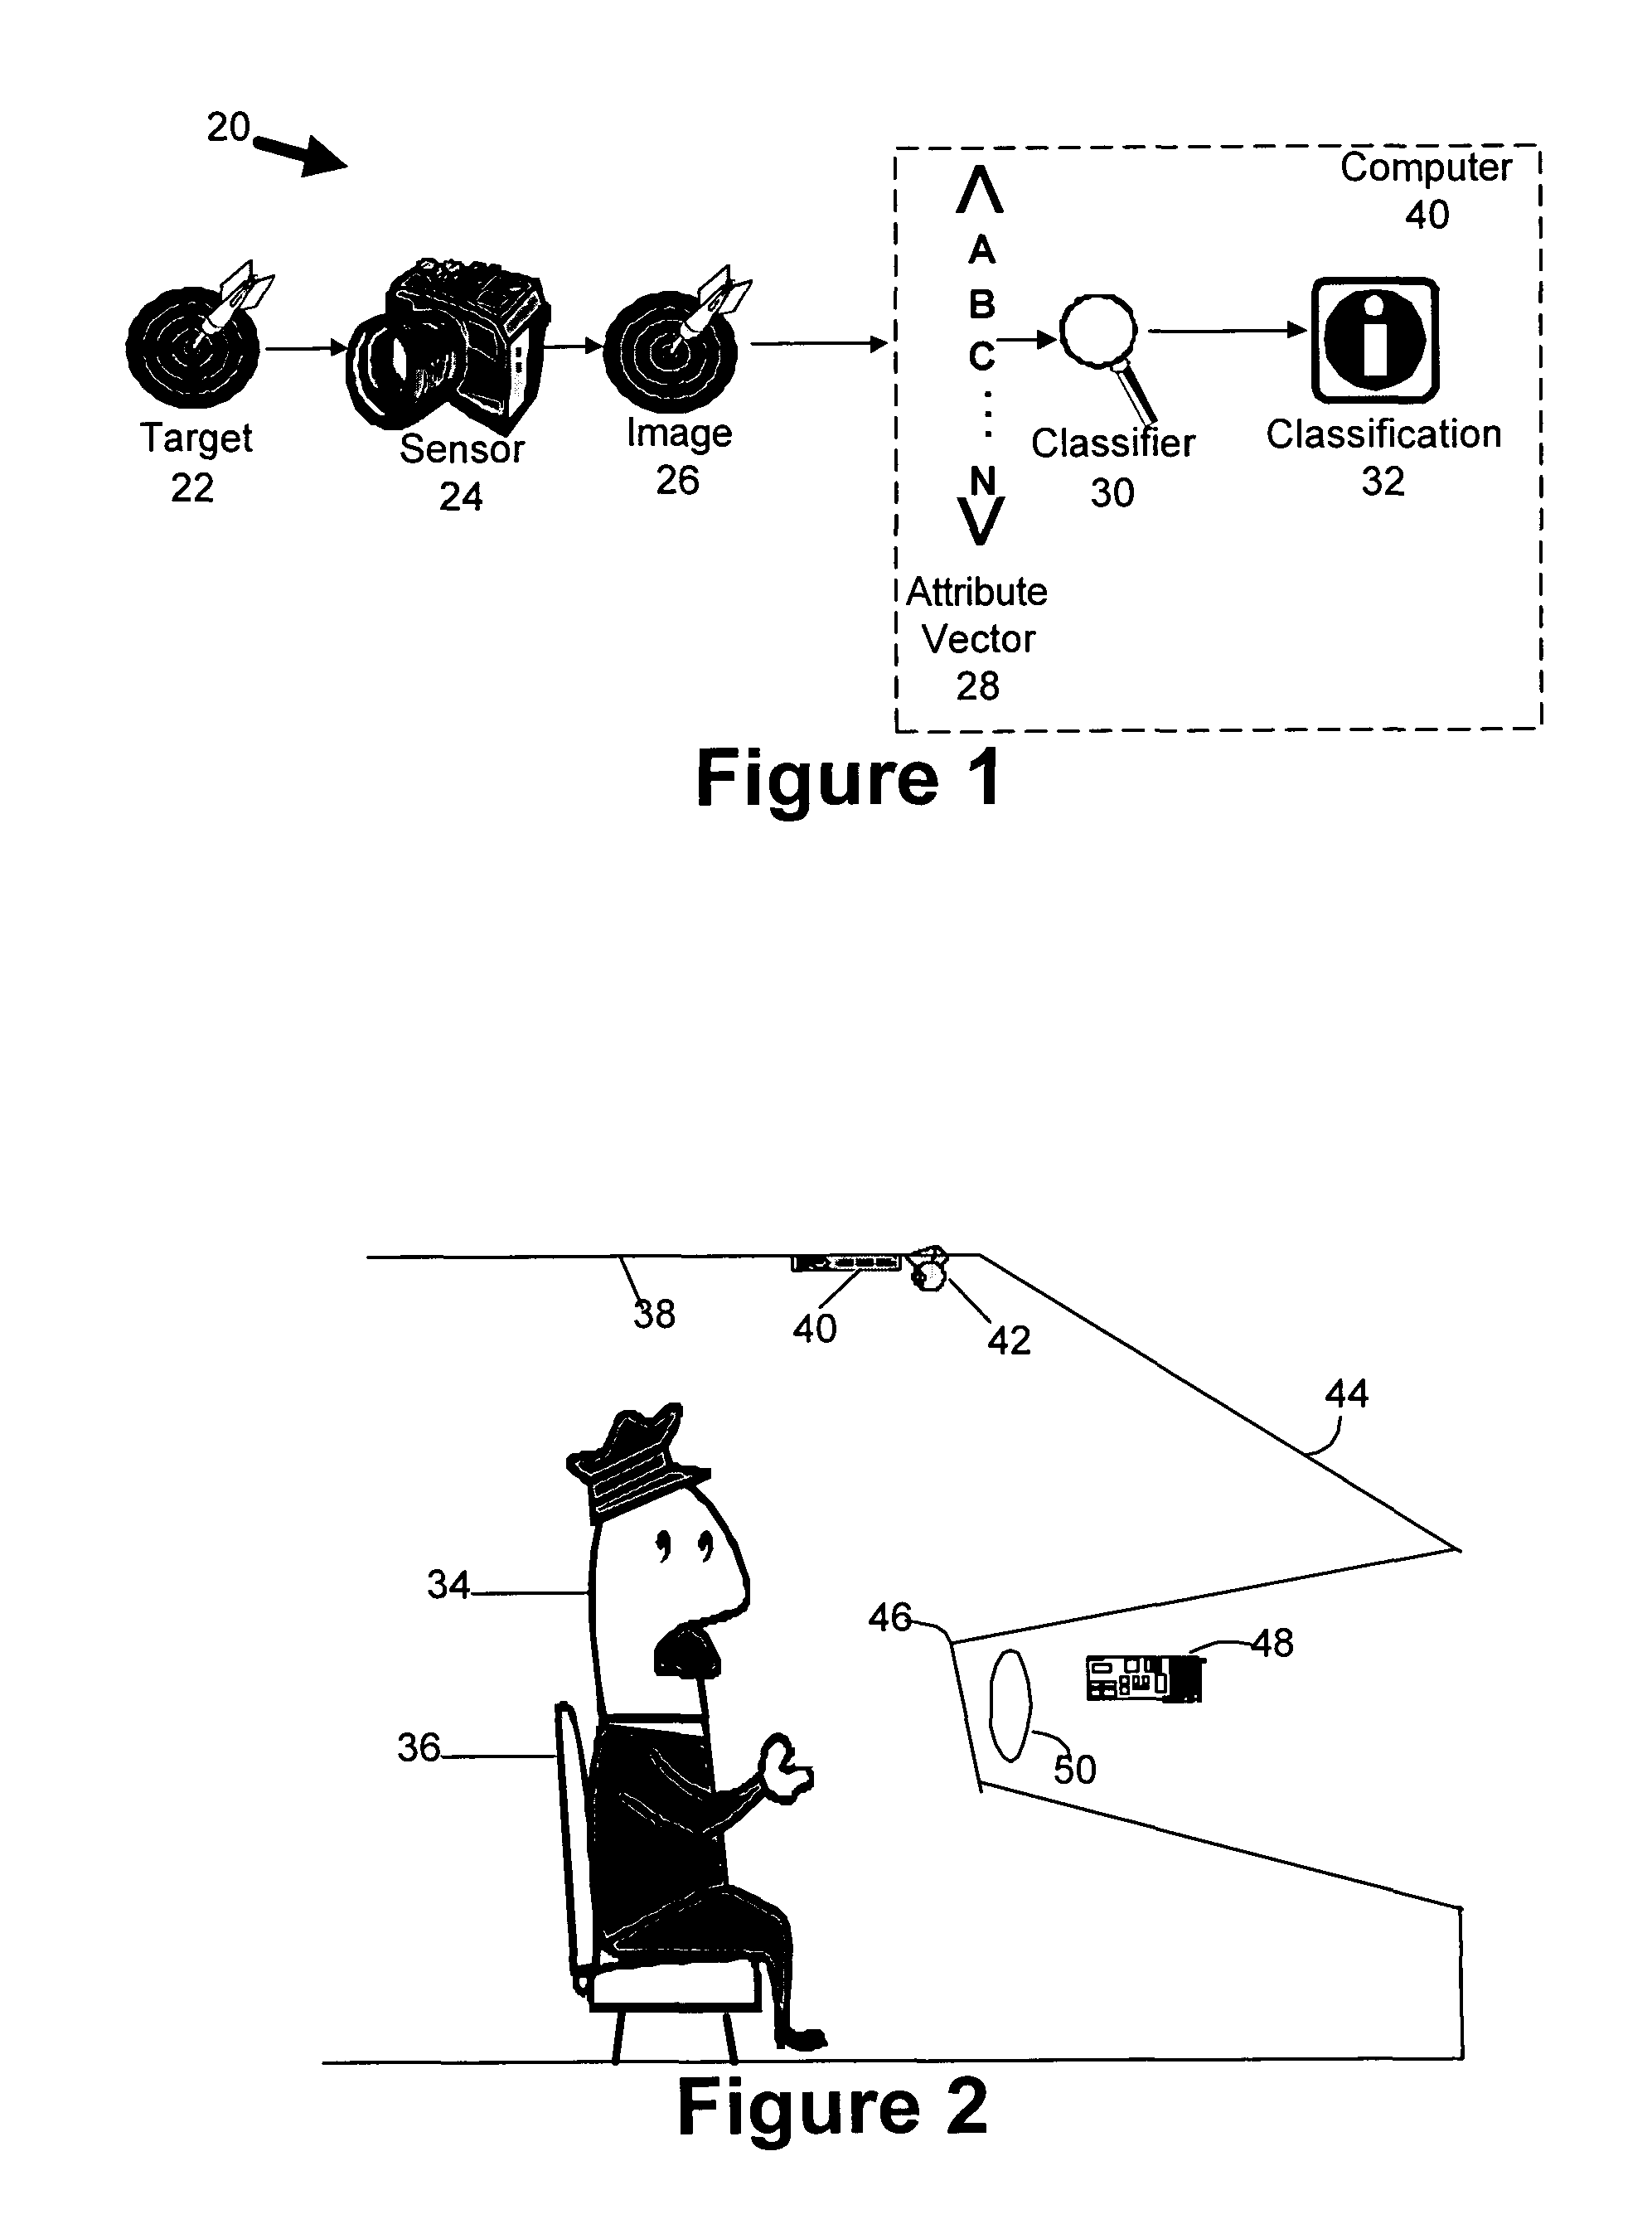 System or method for classifying images